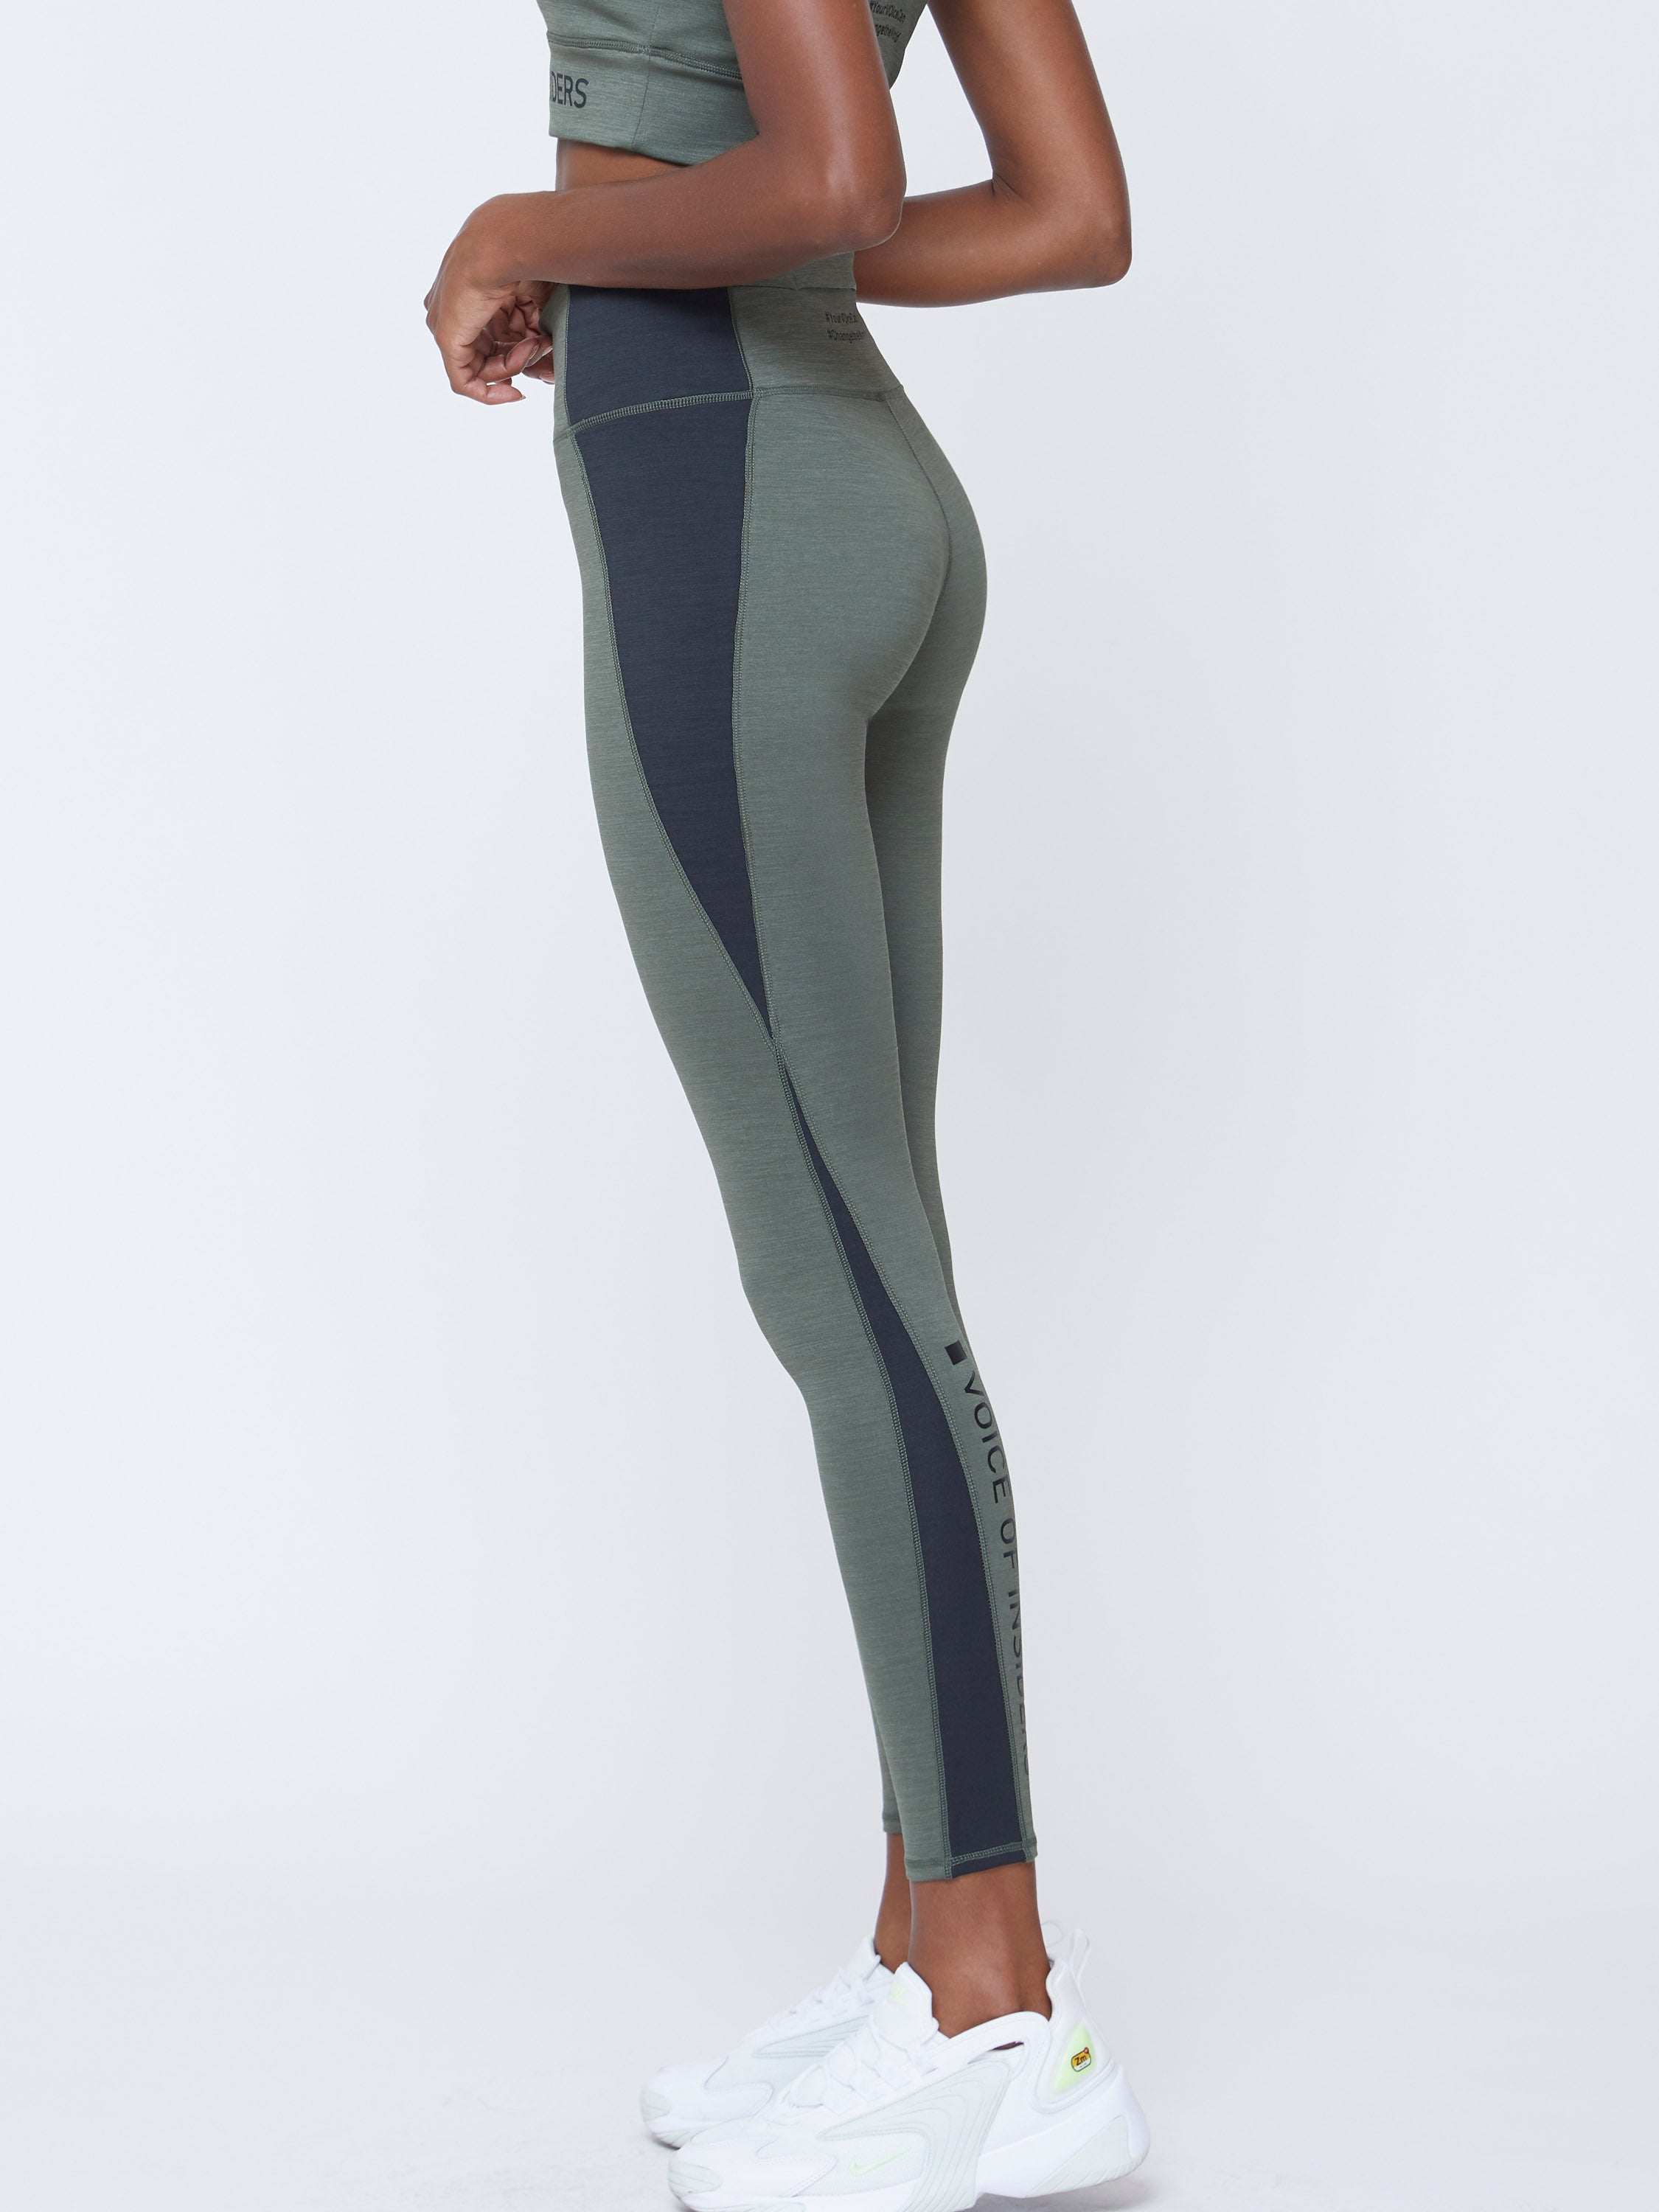 Zyia Active Colorblock Leggings Size 20 - $41 - From Candice